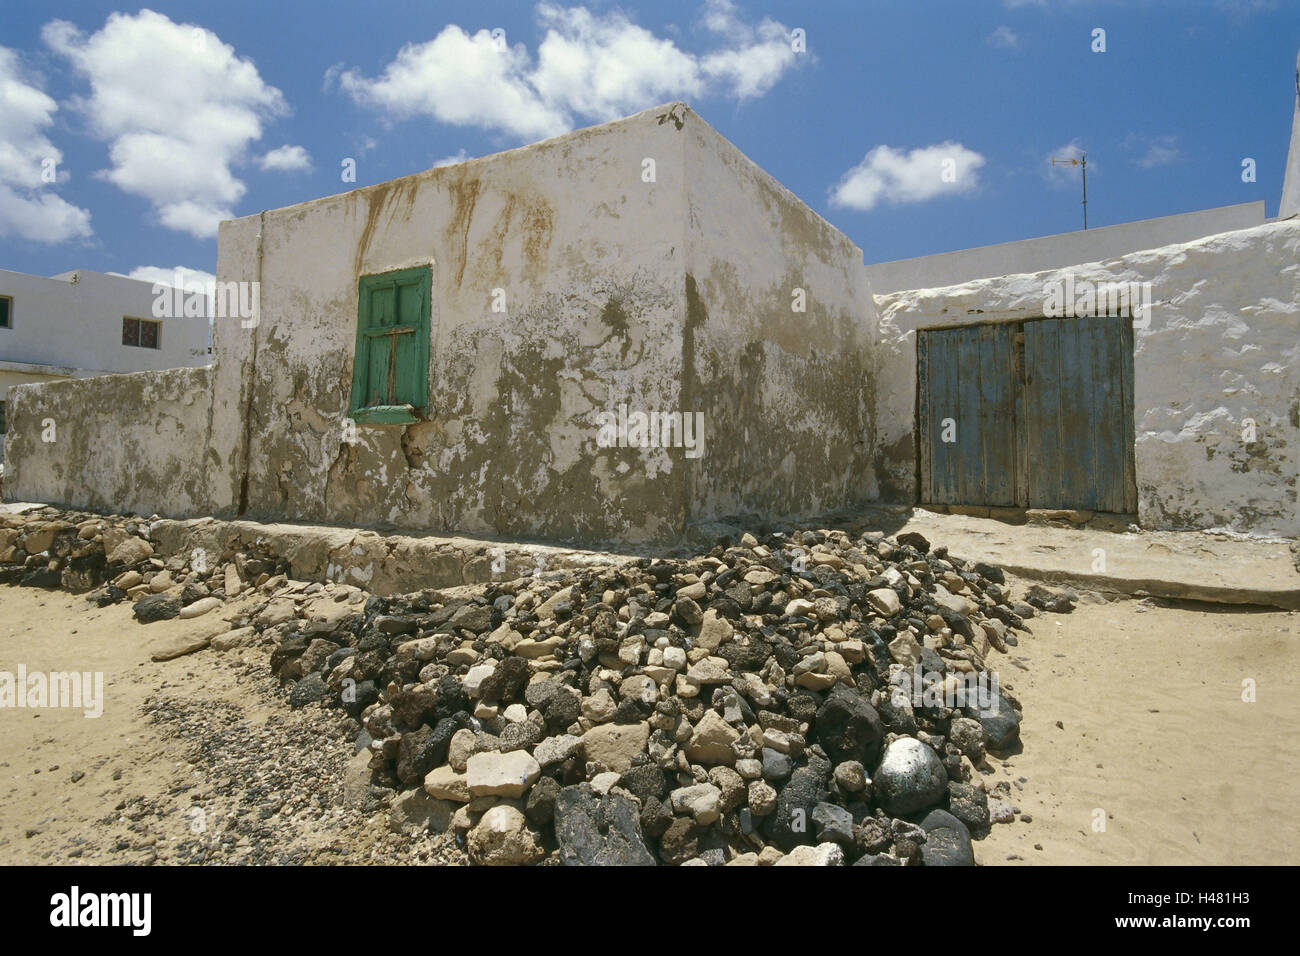 Spain, the Canaries, island La Graciosa, Caleta del Sebo, Dorfstrasse, houses, architecture, street, dusty, heat, wilderness, defensive wall, clouds, heavens, residential houses, exit, outside, deserted, stones, stone heaps, Stock Photo